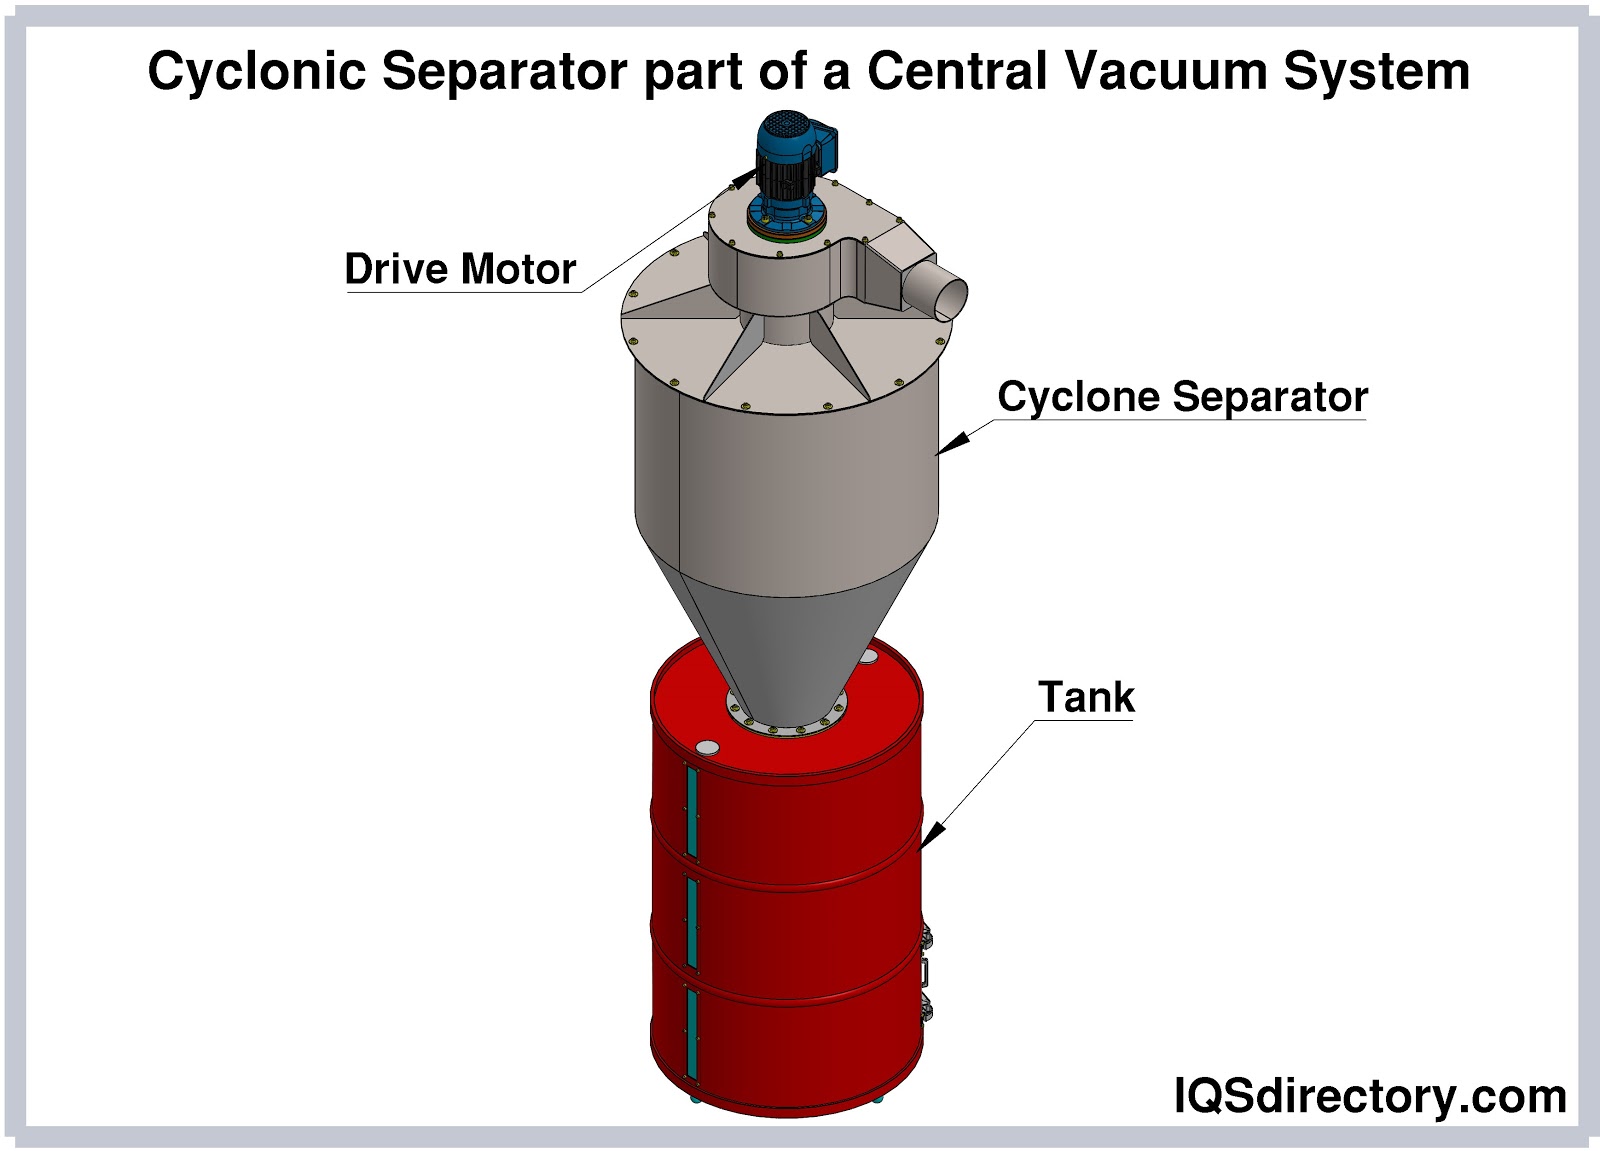 Cyclonic Separator part of a Central Vacuum System